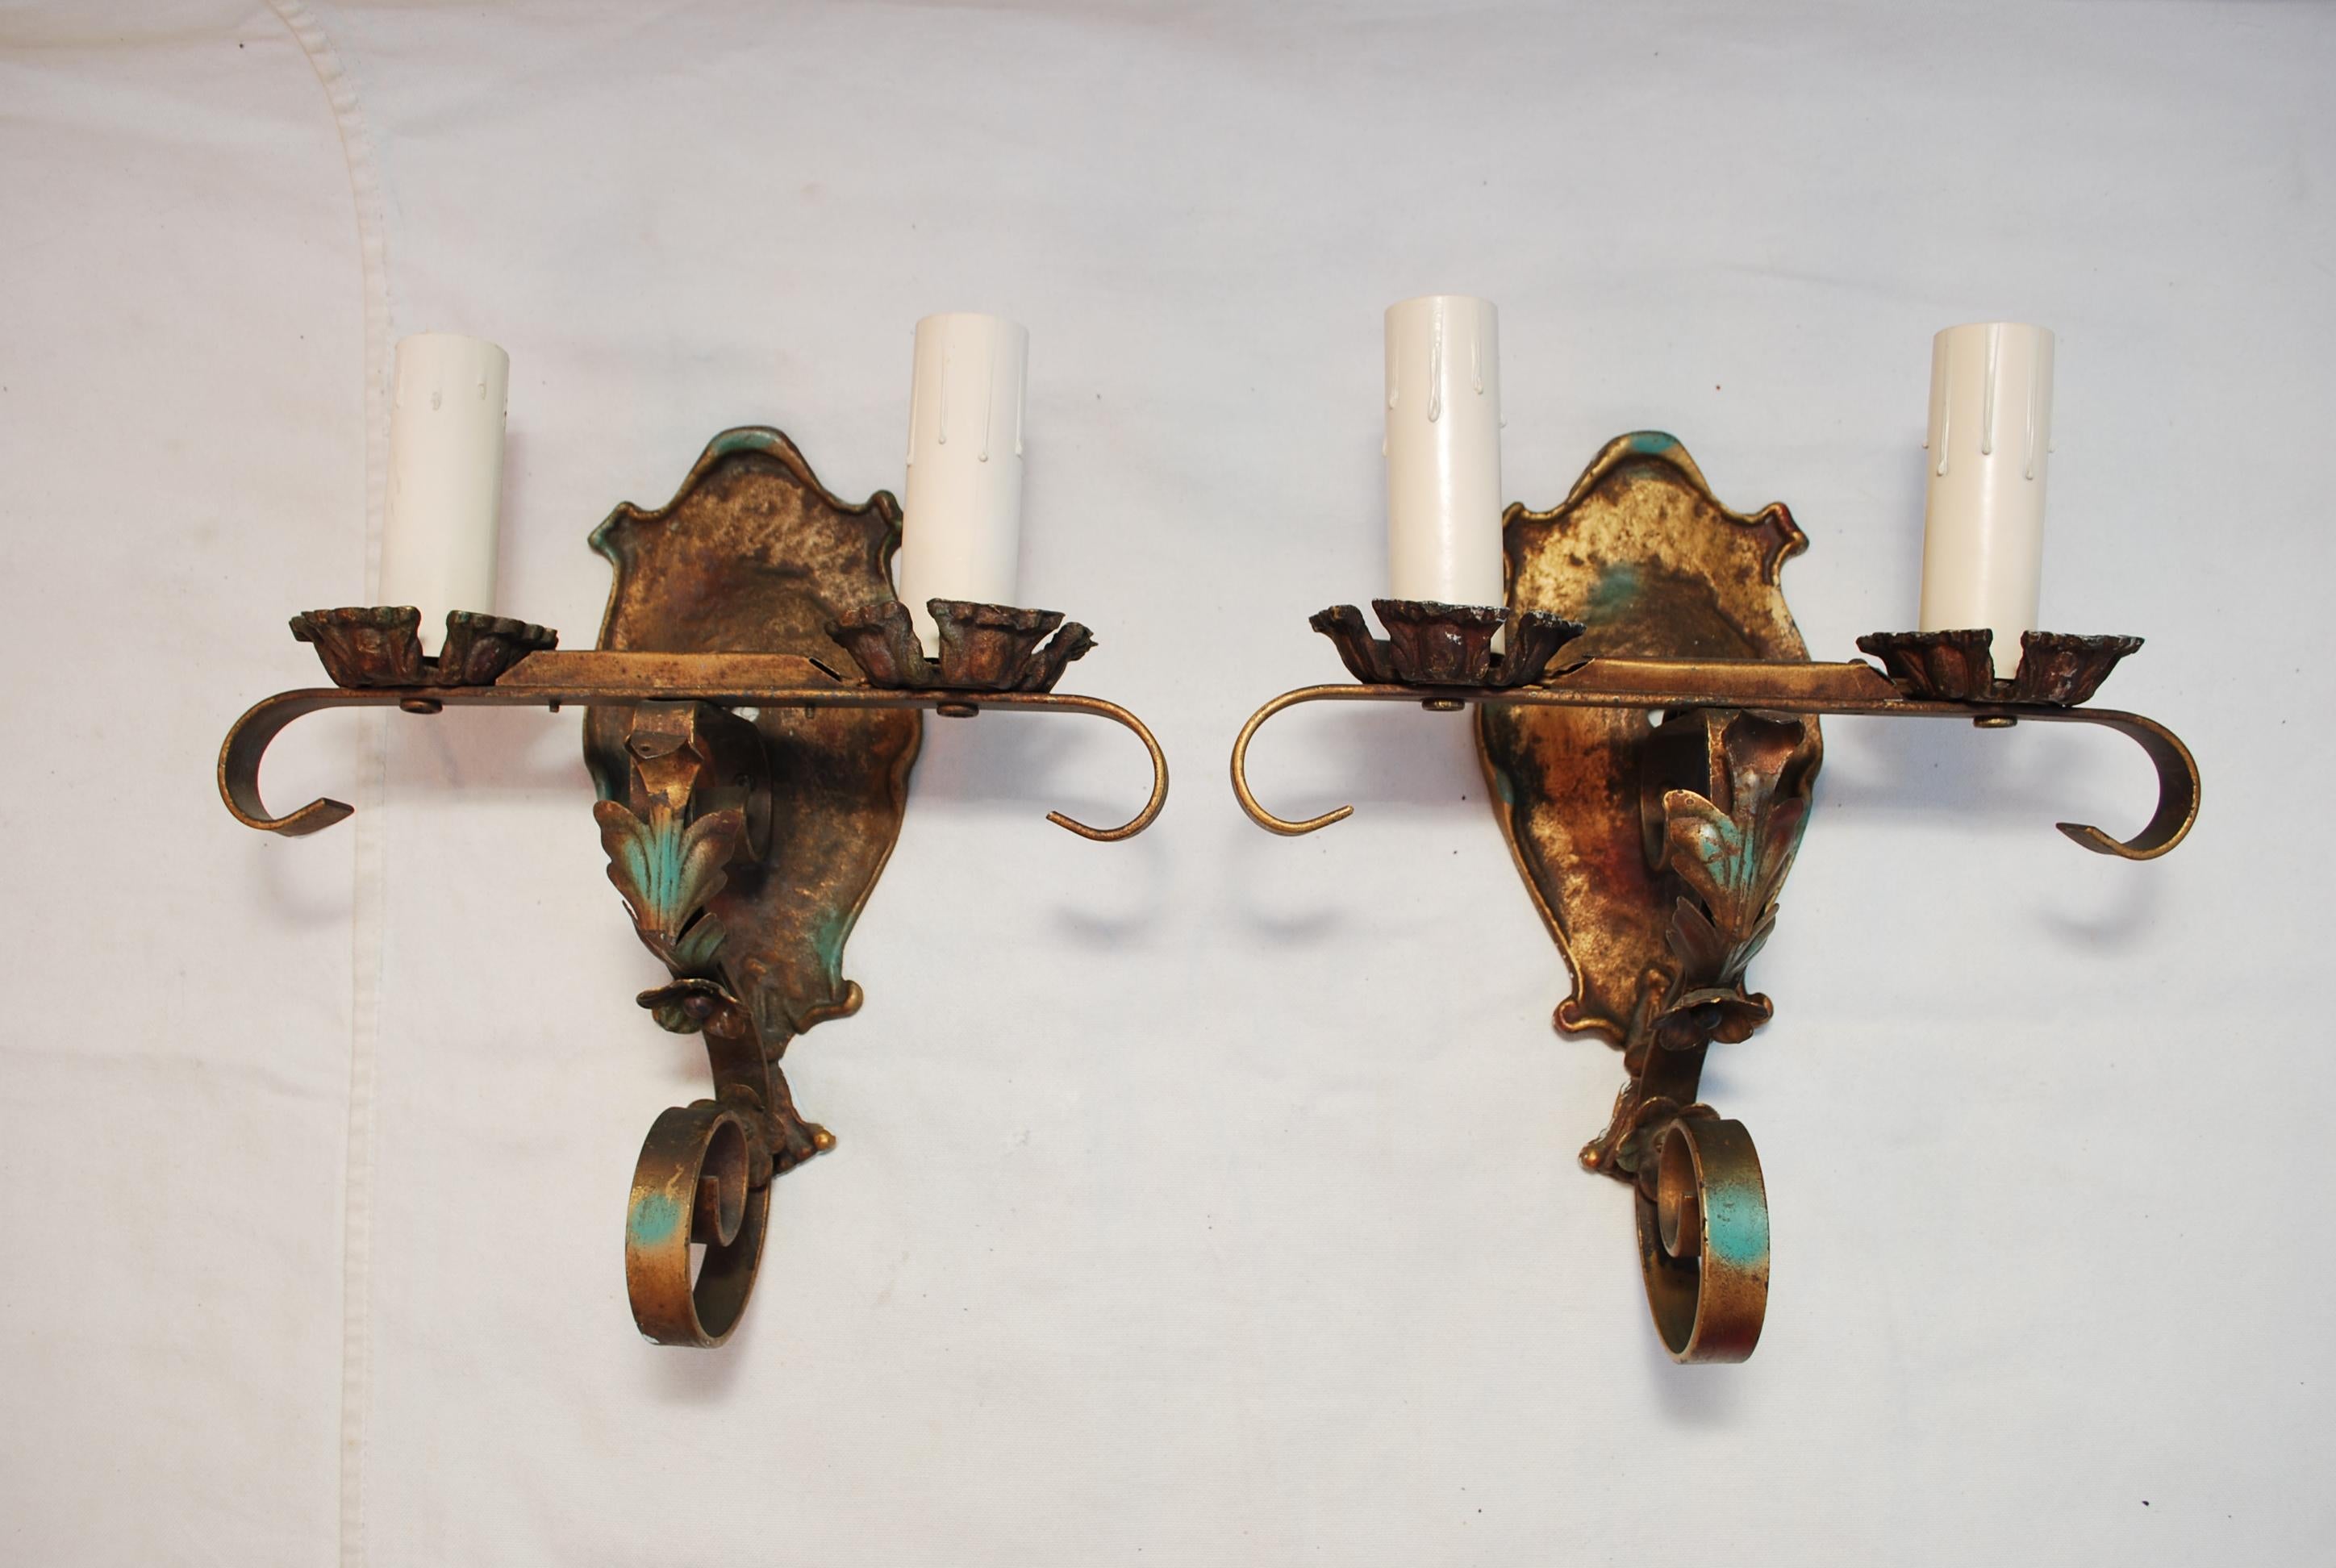 A nice pair of 1920's wrought iron sconces, the patina is allot nicer in person